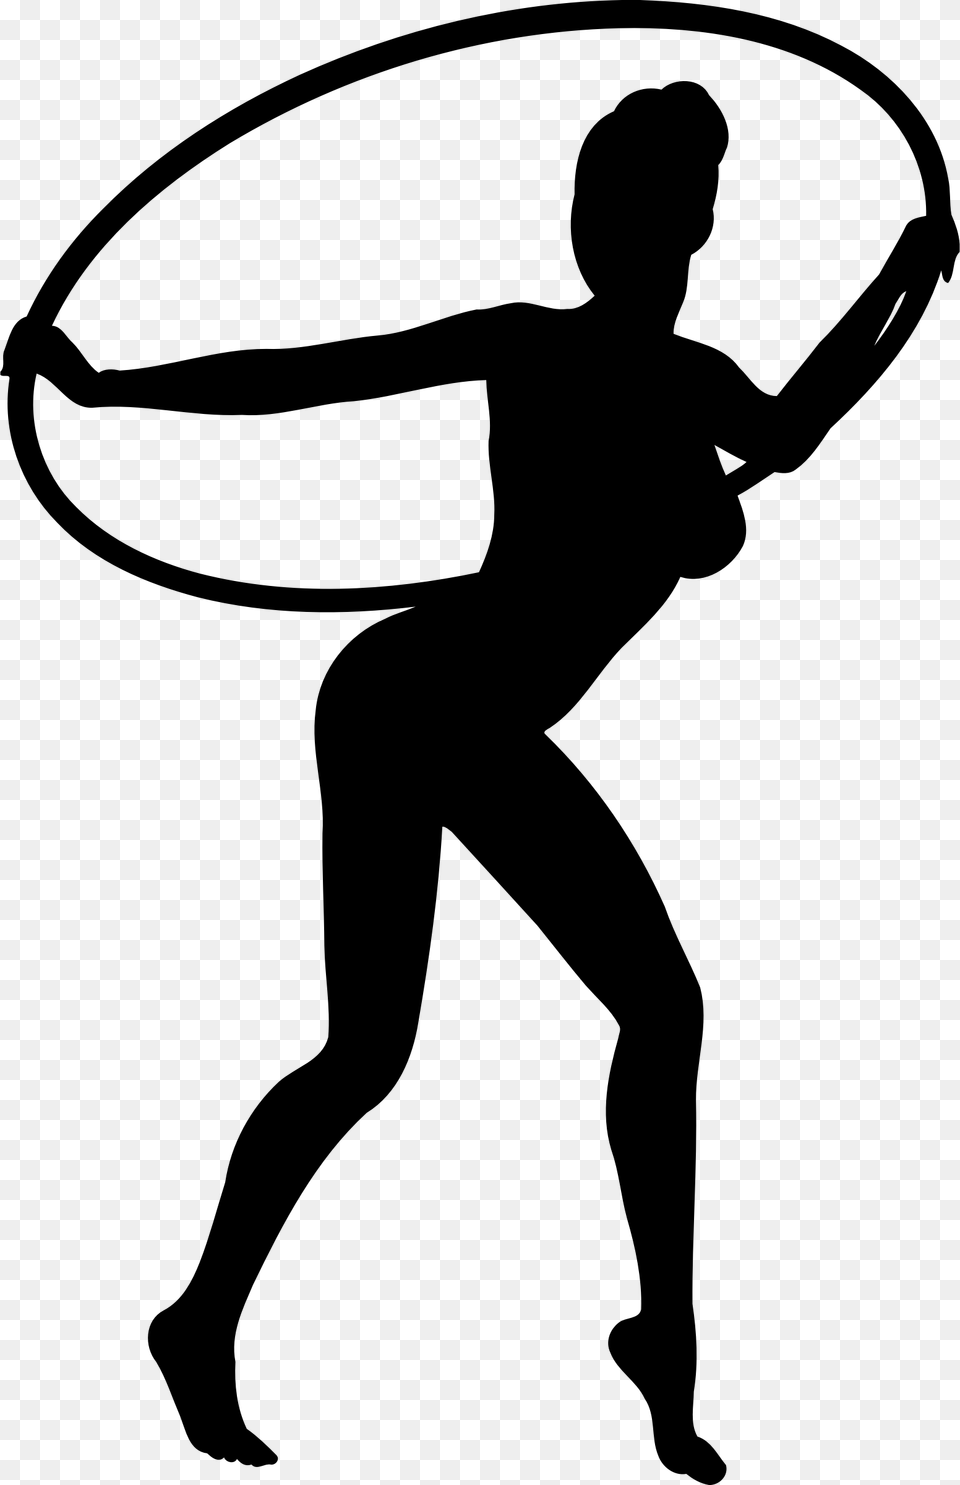 Girl Dancing With Hoop Silhouette Clip Arts Hula Hooping Girl Silhouette, Gray Png